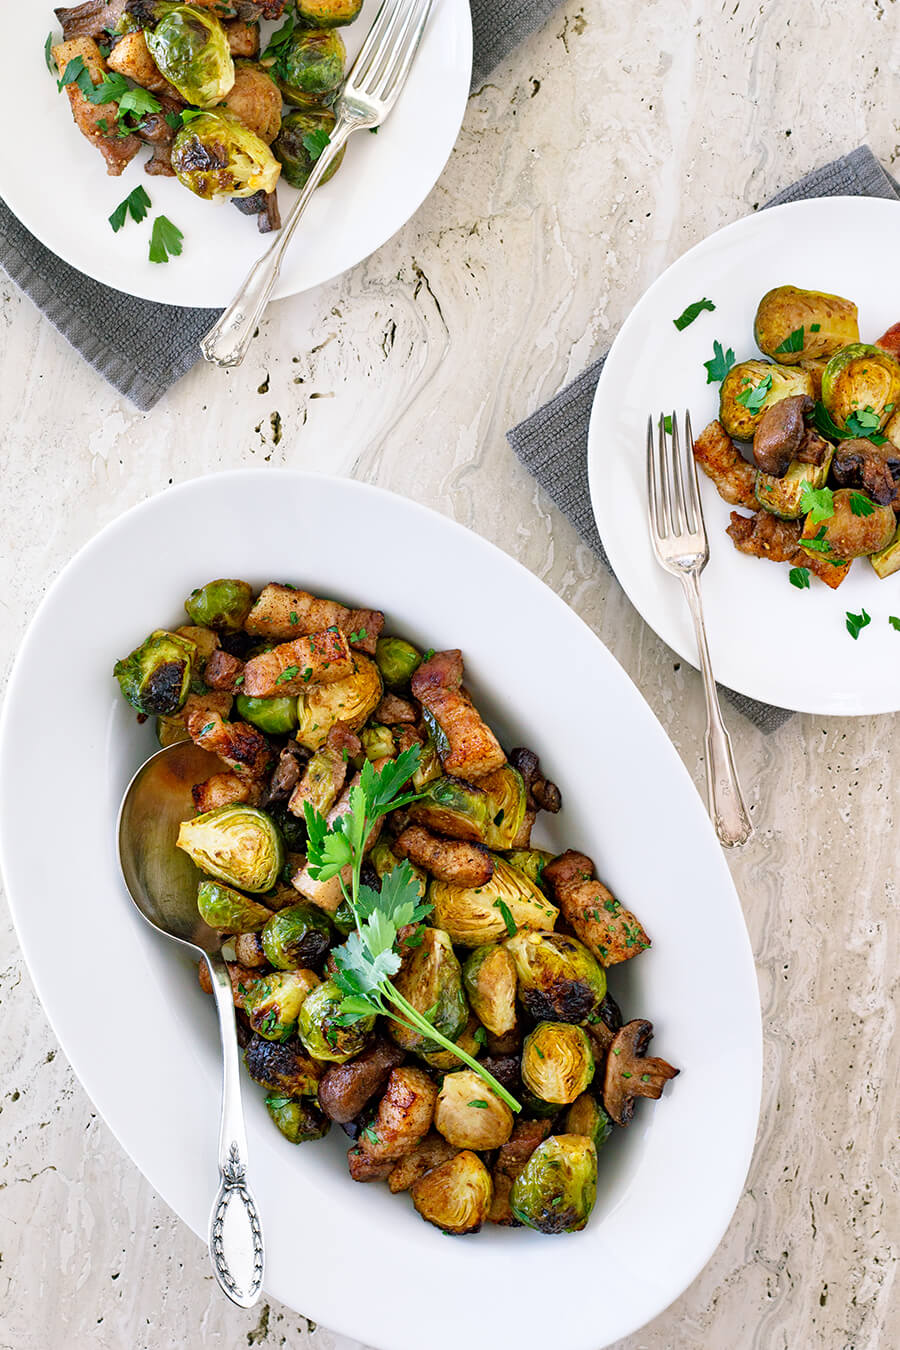 These Roasted Brussels Sprouts with Pork Belly & Mushrooms are super easy to make and roasted all in one pan for a very delicious side dish! Recipe at www.designsofanykind.com